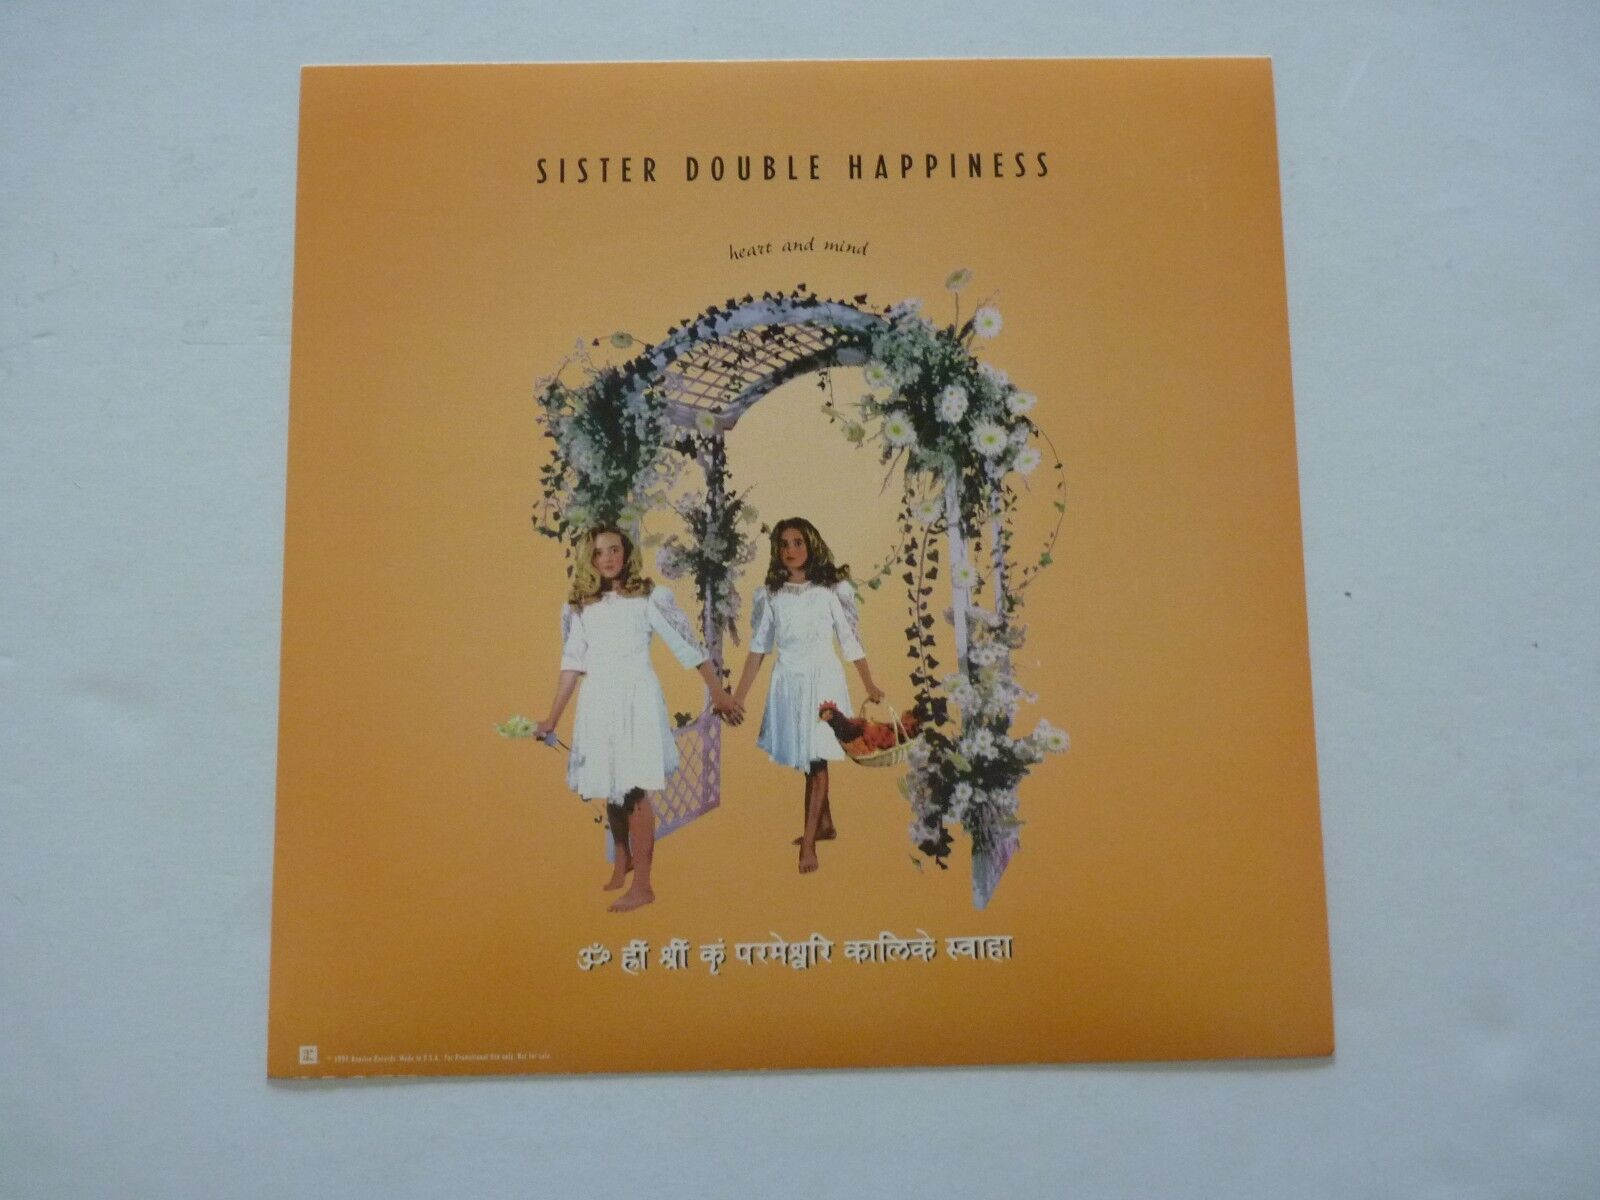 Sister Double Happiness Heart and Mind Promo LP Record Photo Flat 12x12 Poster